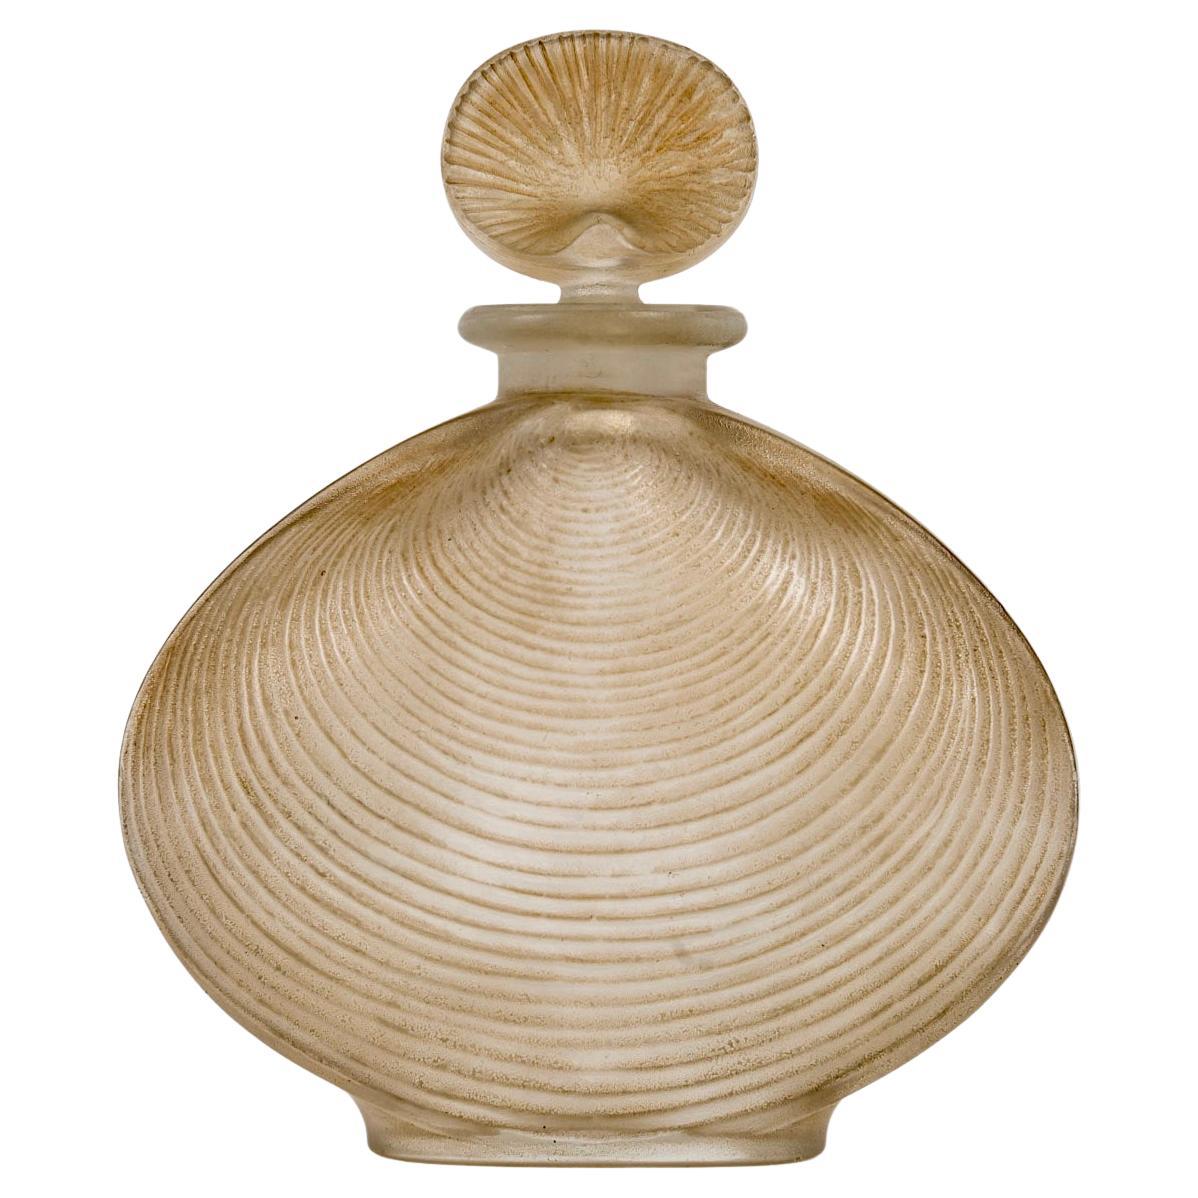 1920 René Lalique Perfume Bottle Telline Frosted Glass with Sepia Patina For Sale